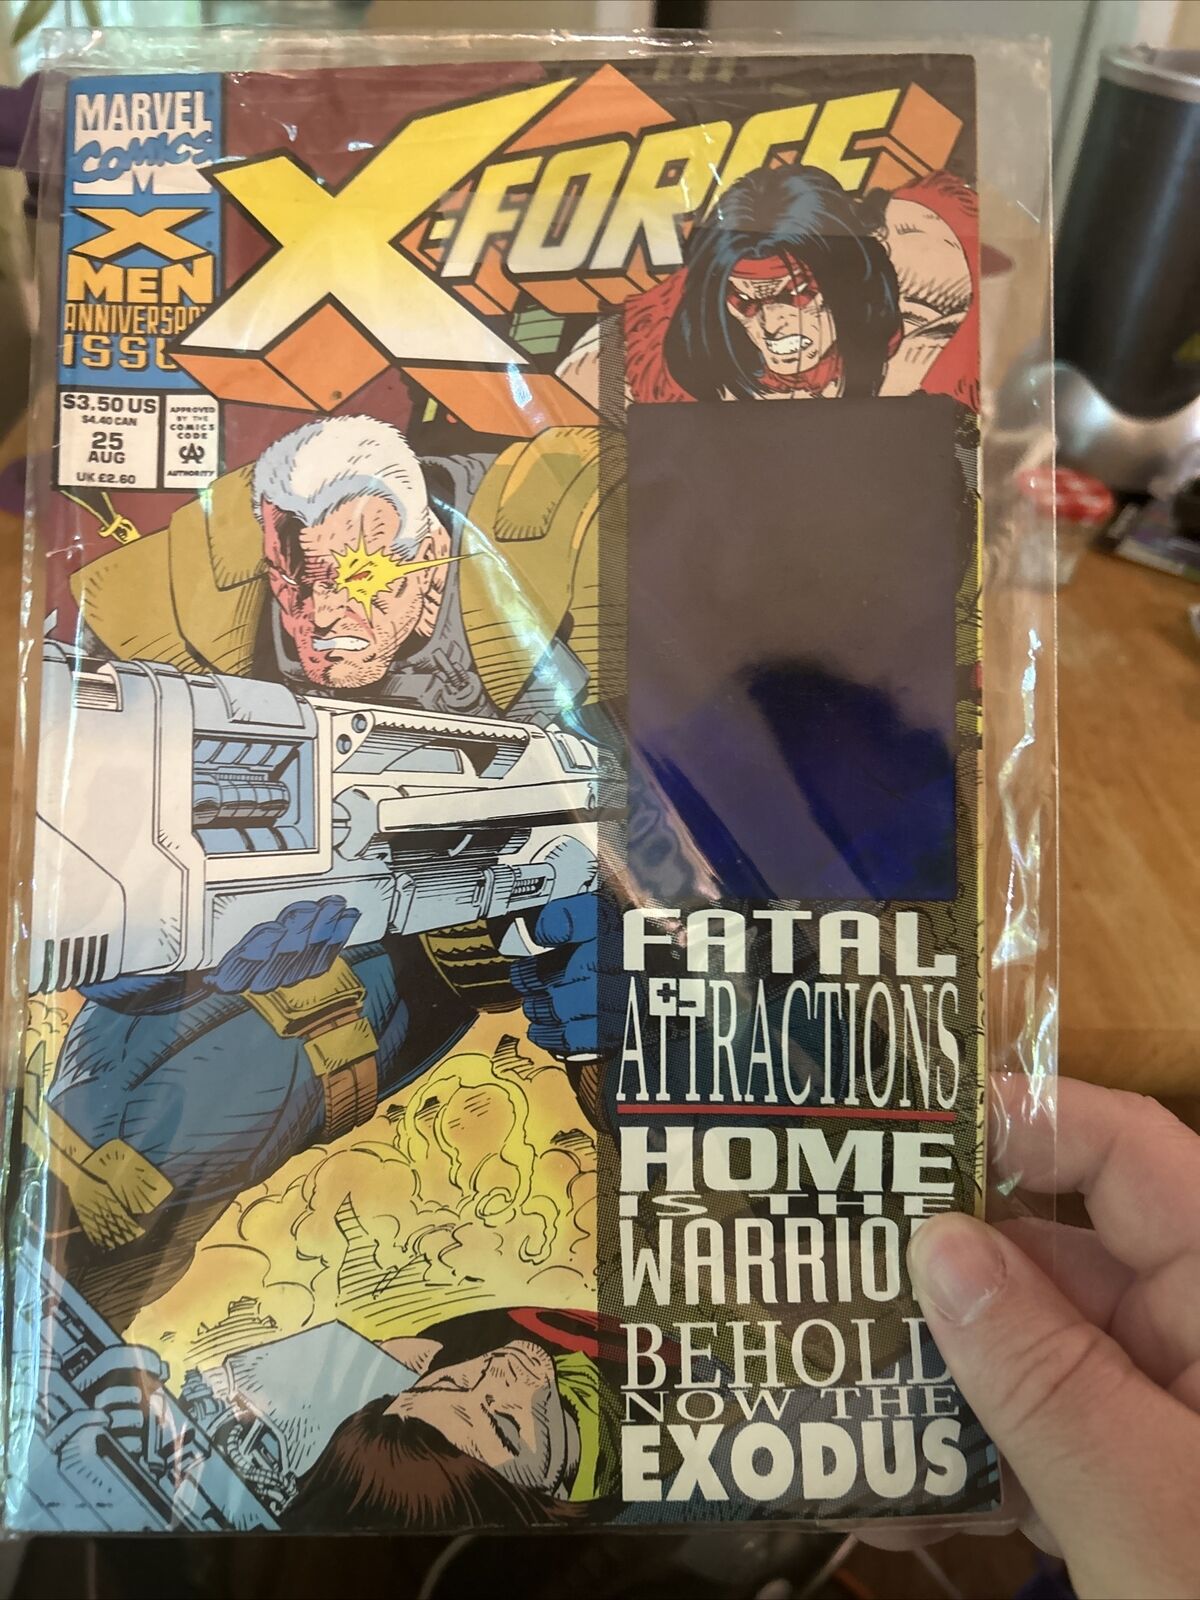 X-Force #25 (Marvel, August 1993) - NM